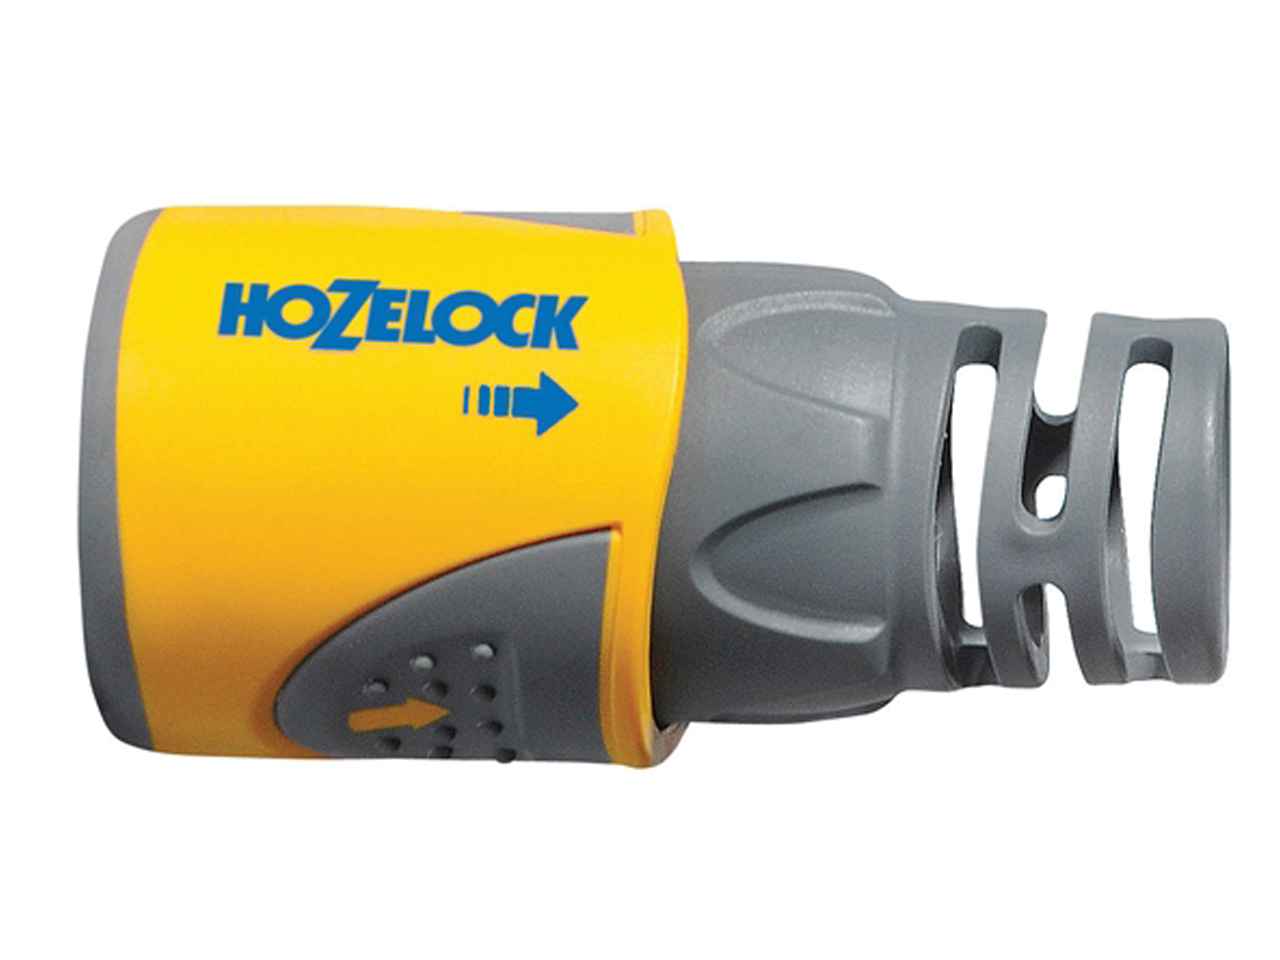 Hozelock 2050 Hose End Connector for 12.5-15mm (1/2 in & 5/8 in) Hose